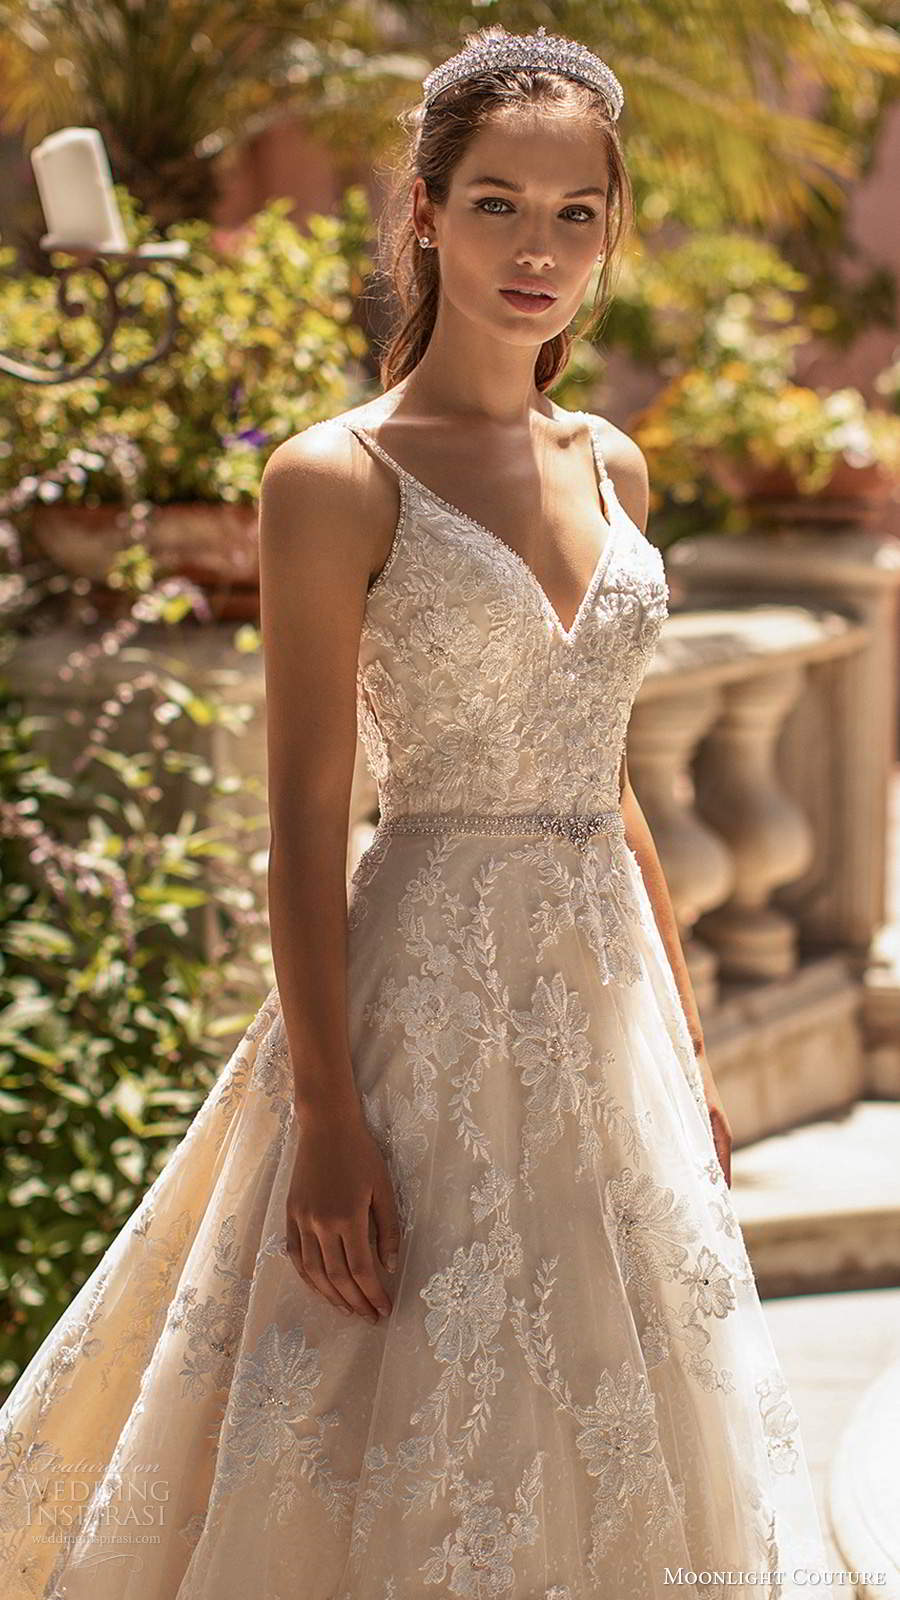 moonlight couture spring 2020 bridal sleeveless beaded thin straps sweetheart neckline fully embellished lace a line ball gown wedding dress low back chapel train (10) zv